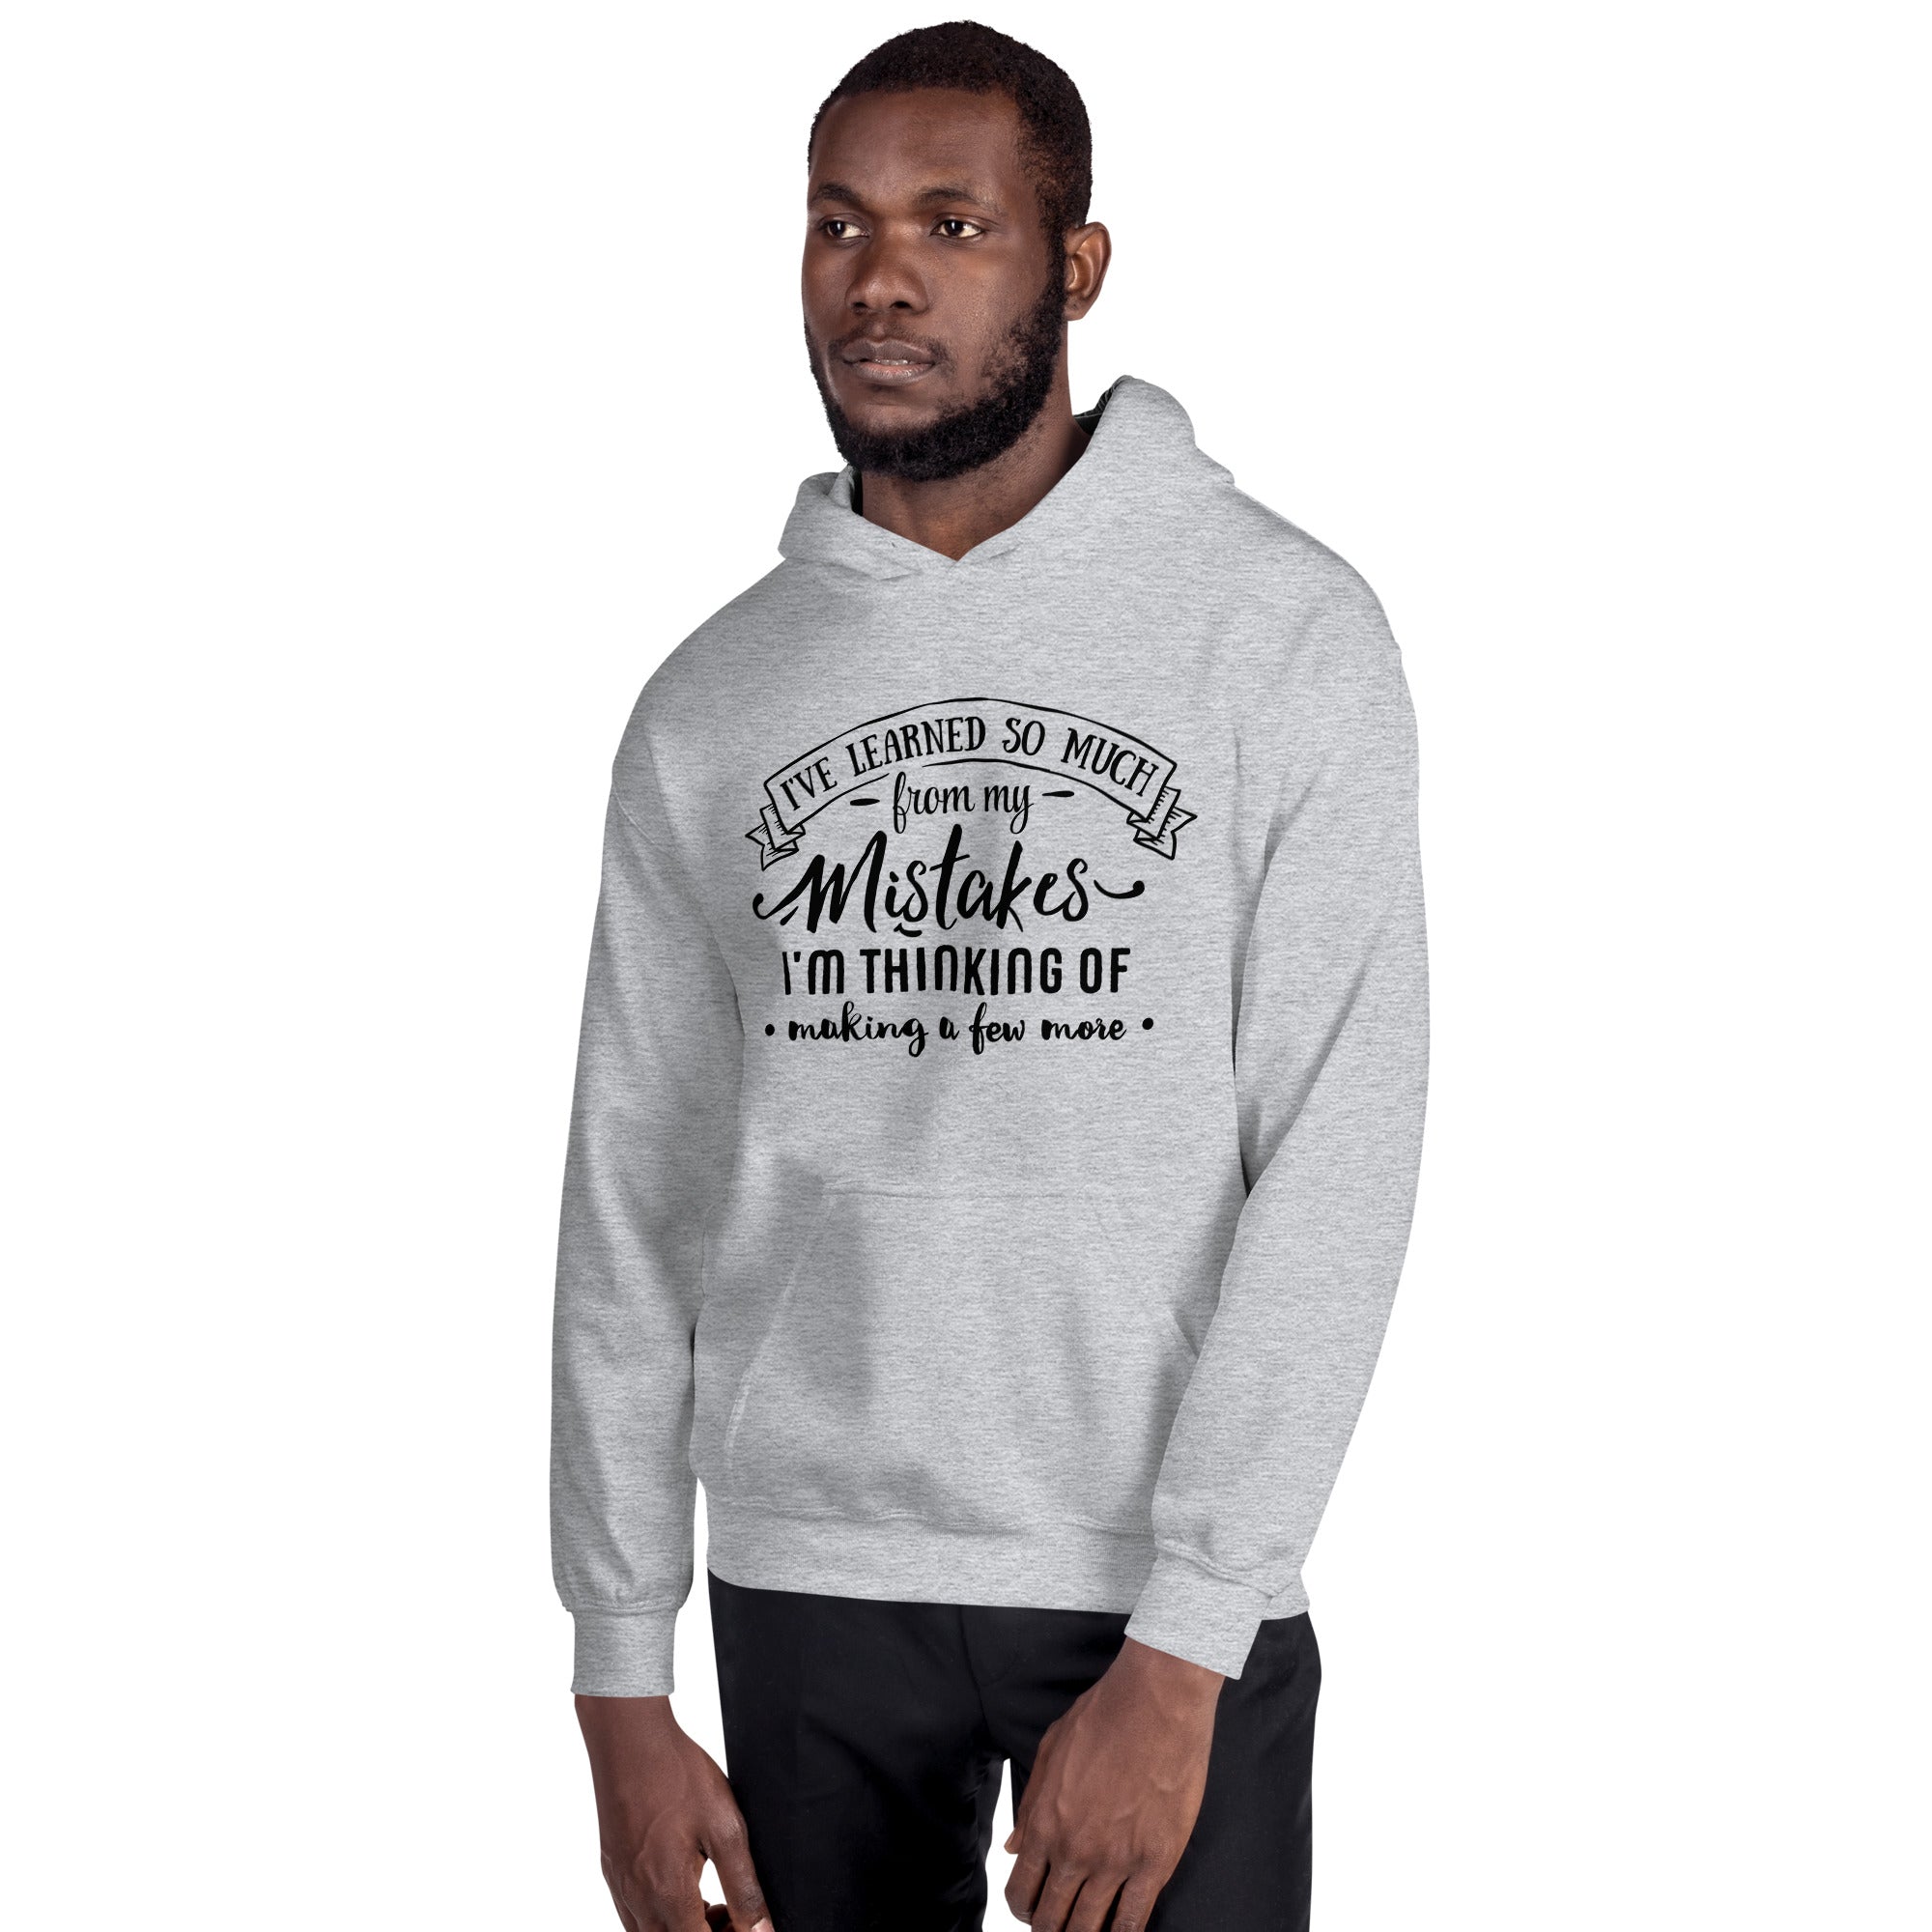 Learned From My Mistakes - Unisex Hoodie